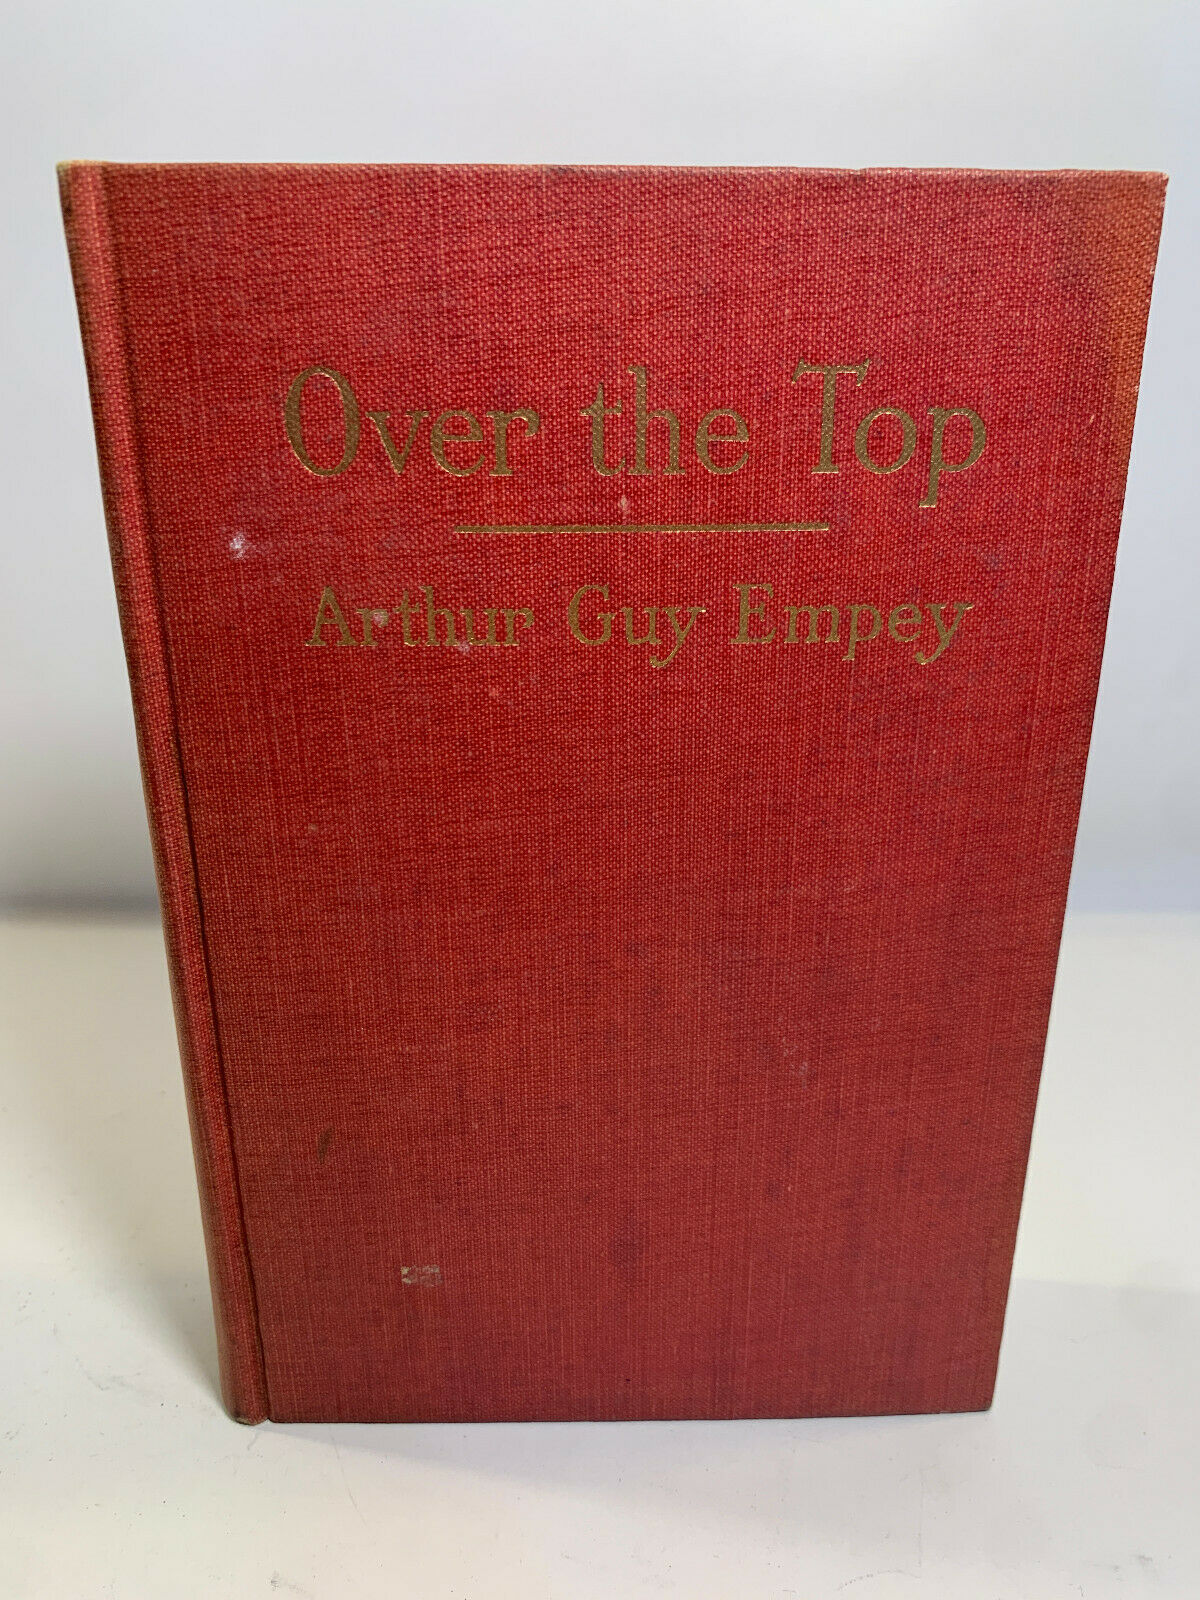 Over The Top: An American Soilder Who Went by Arthur Guy Empey